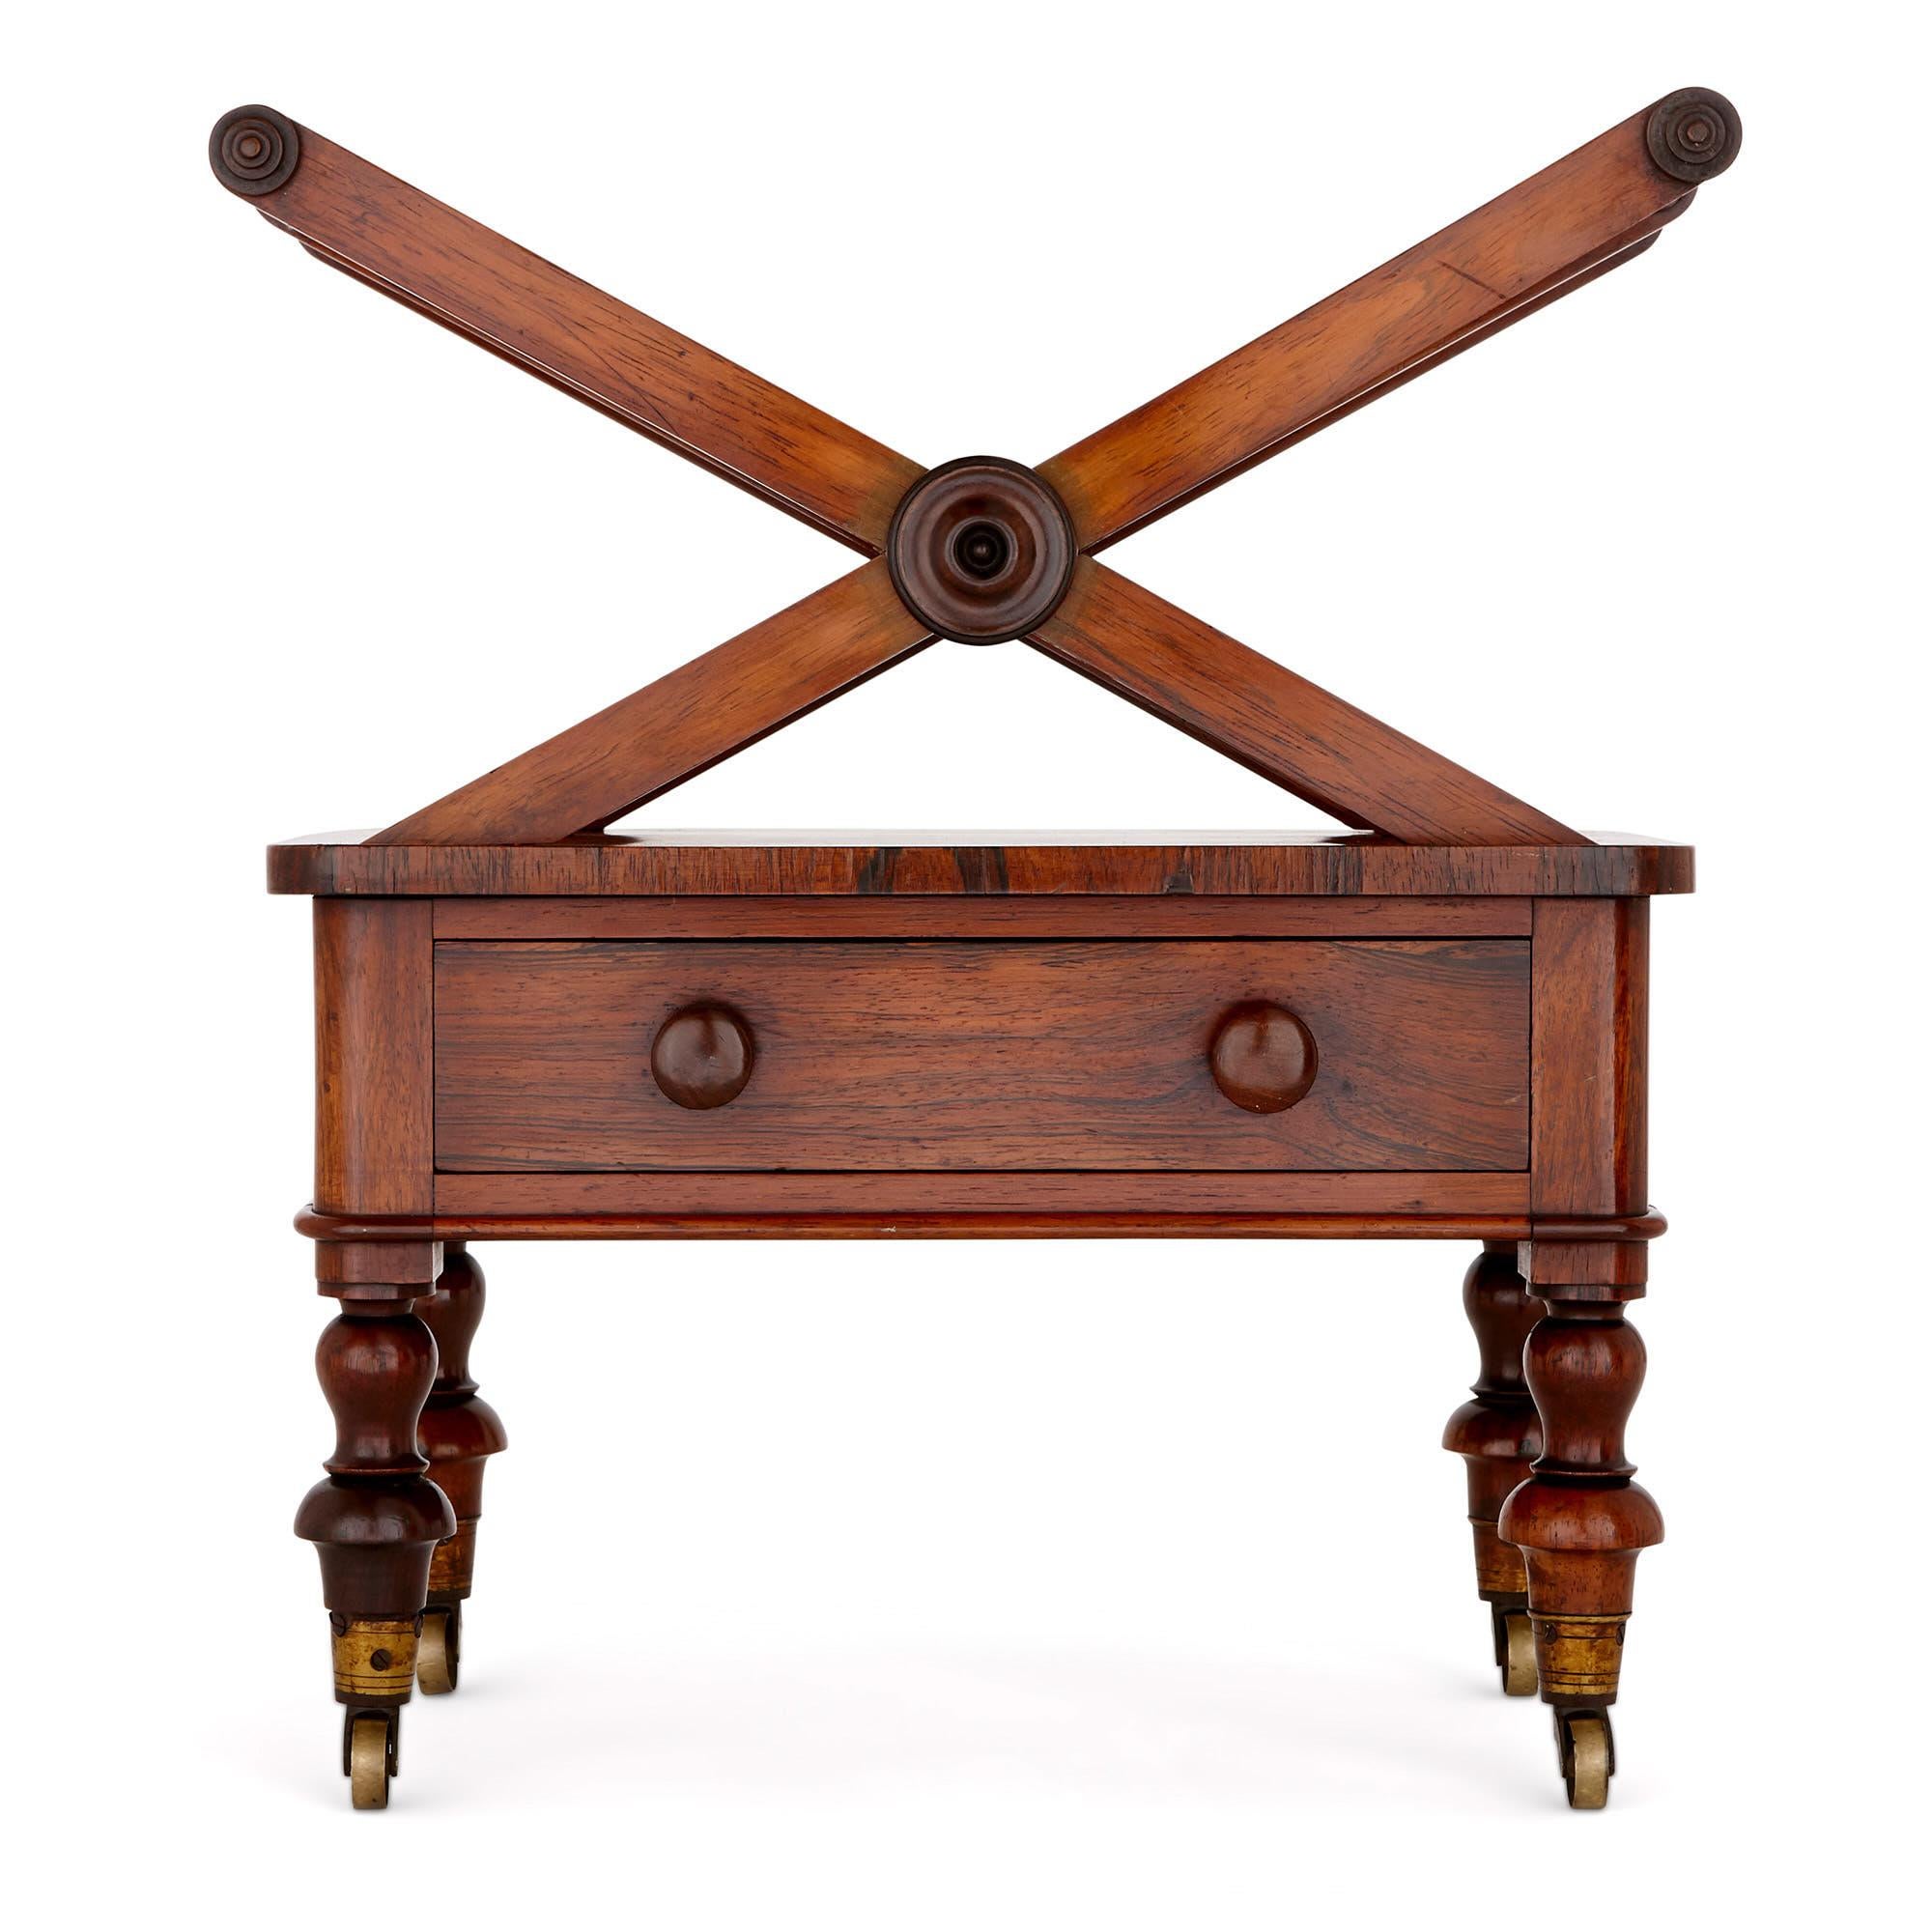 Known as a canterbury (after the Bishop of Canterbury), this beautiful piece of furniture is designed to hold sheet music. Canterburys came into fashion in the late 18th Century in England, and were often crafted from mahogany, rosewood or walnut.